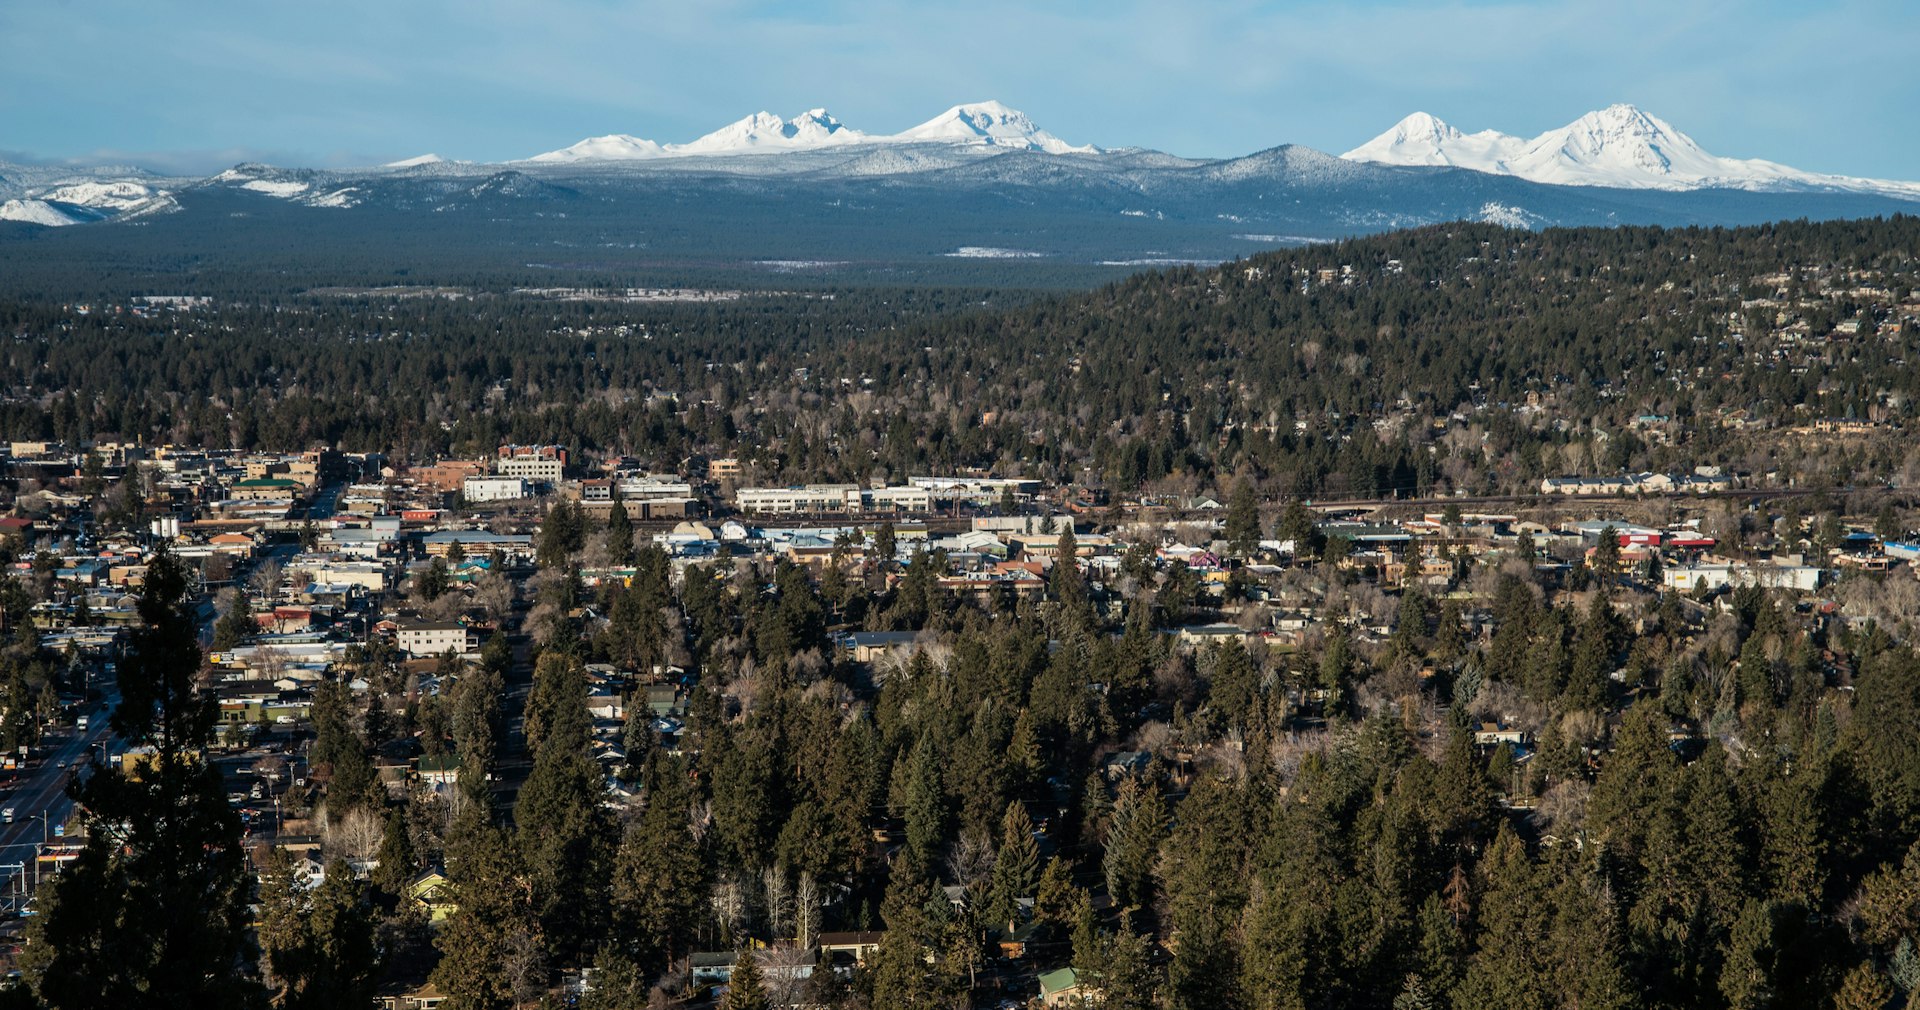 Bend OR with Cascade Range